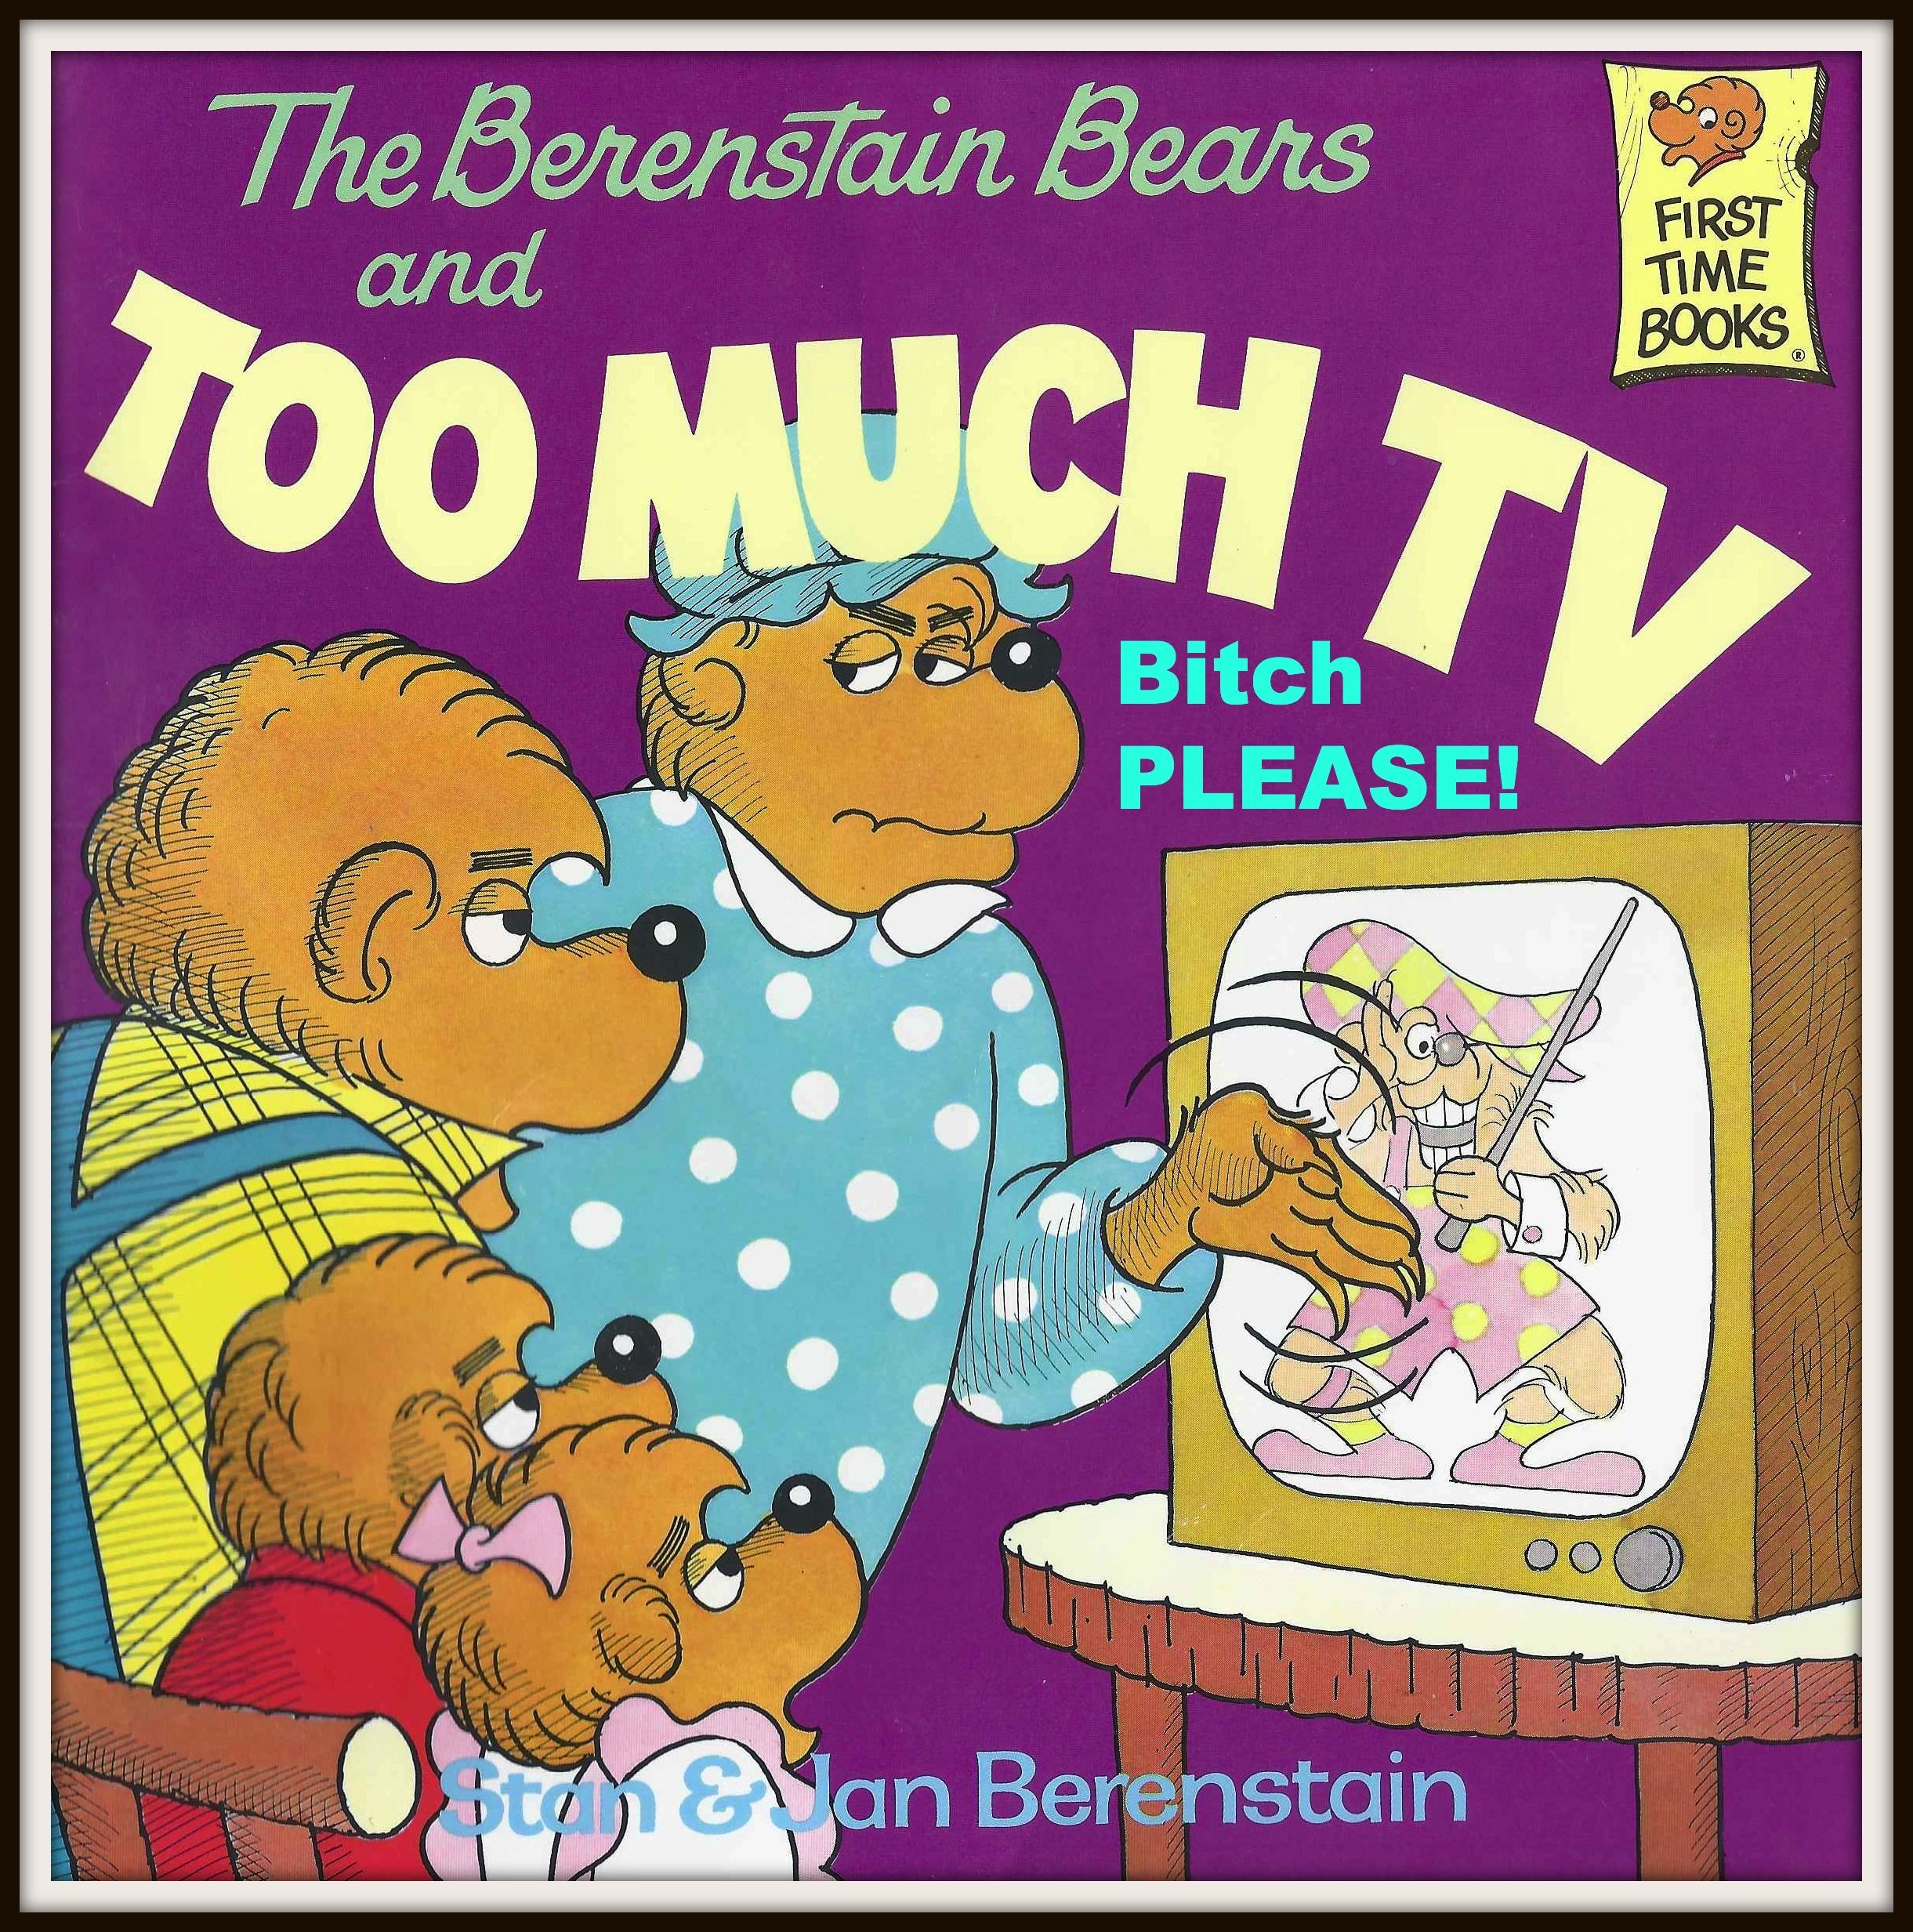 A HILARIOUS look at the bitchy subtext in The #Berenstain Bears and Too Much TV